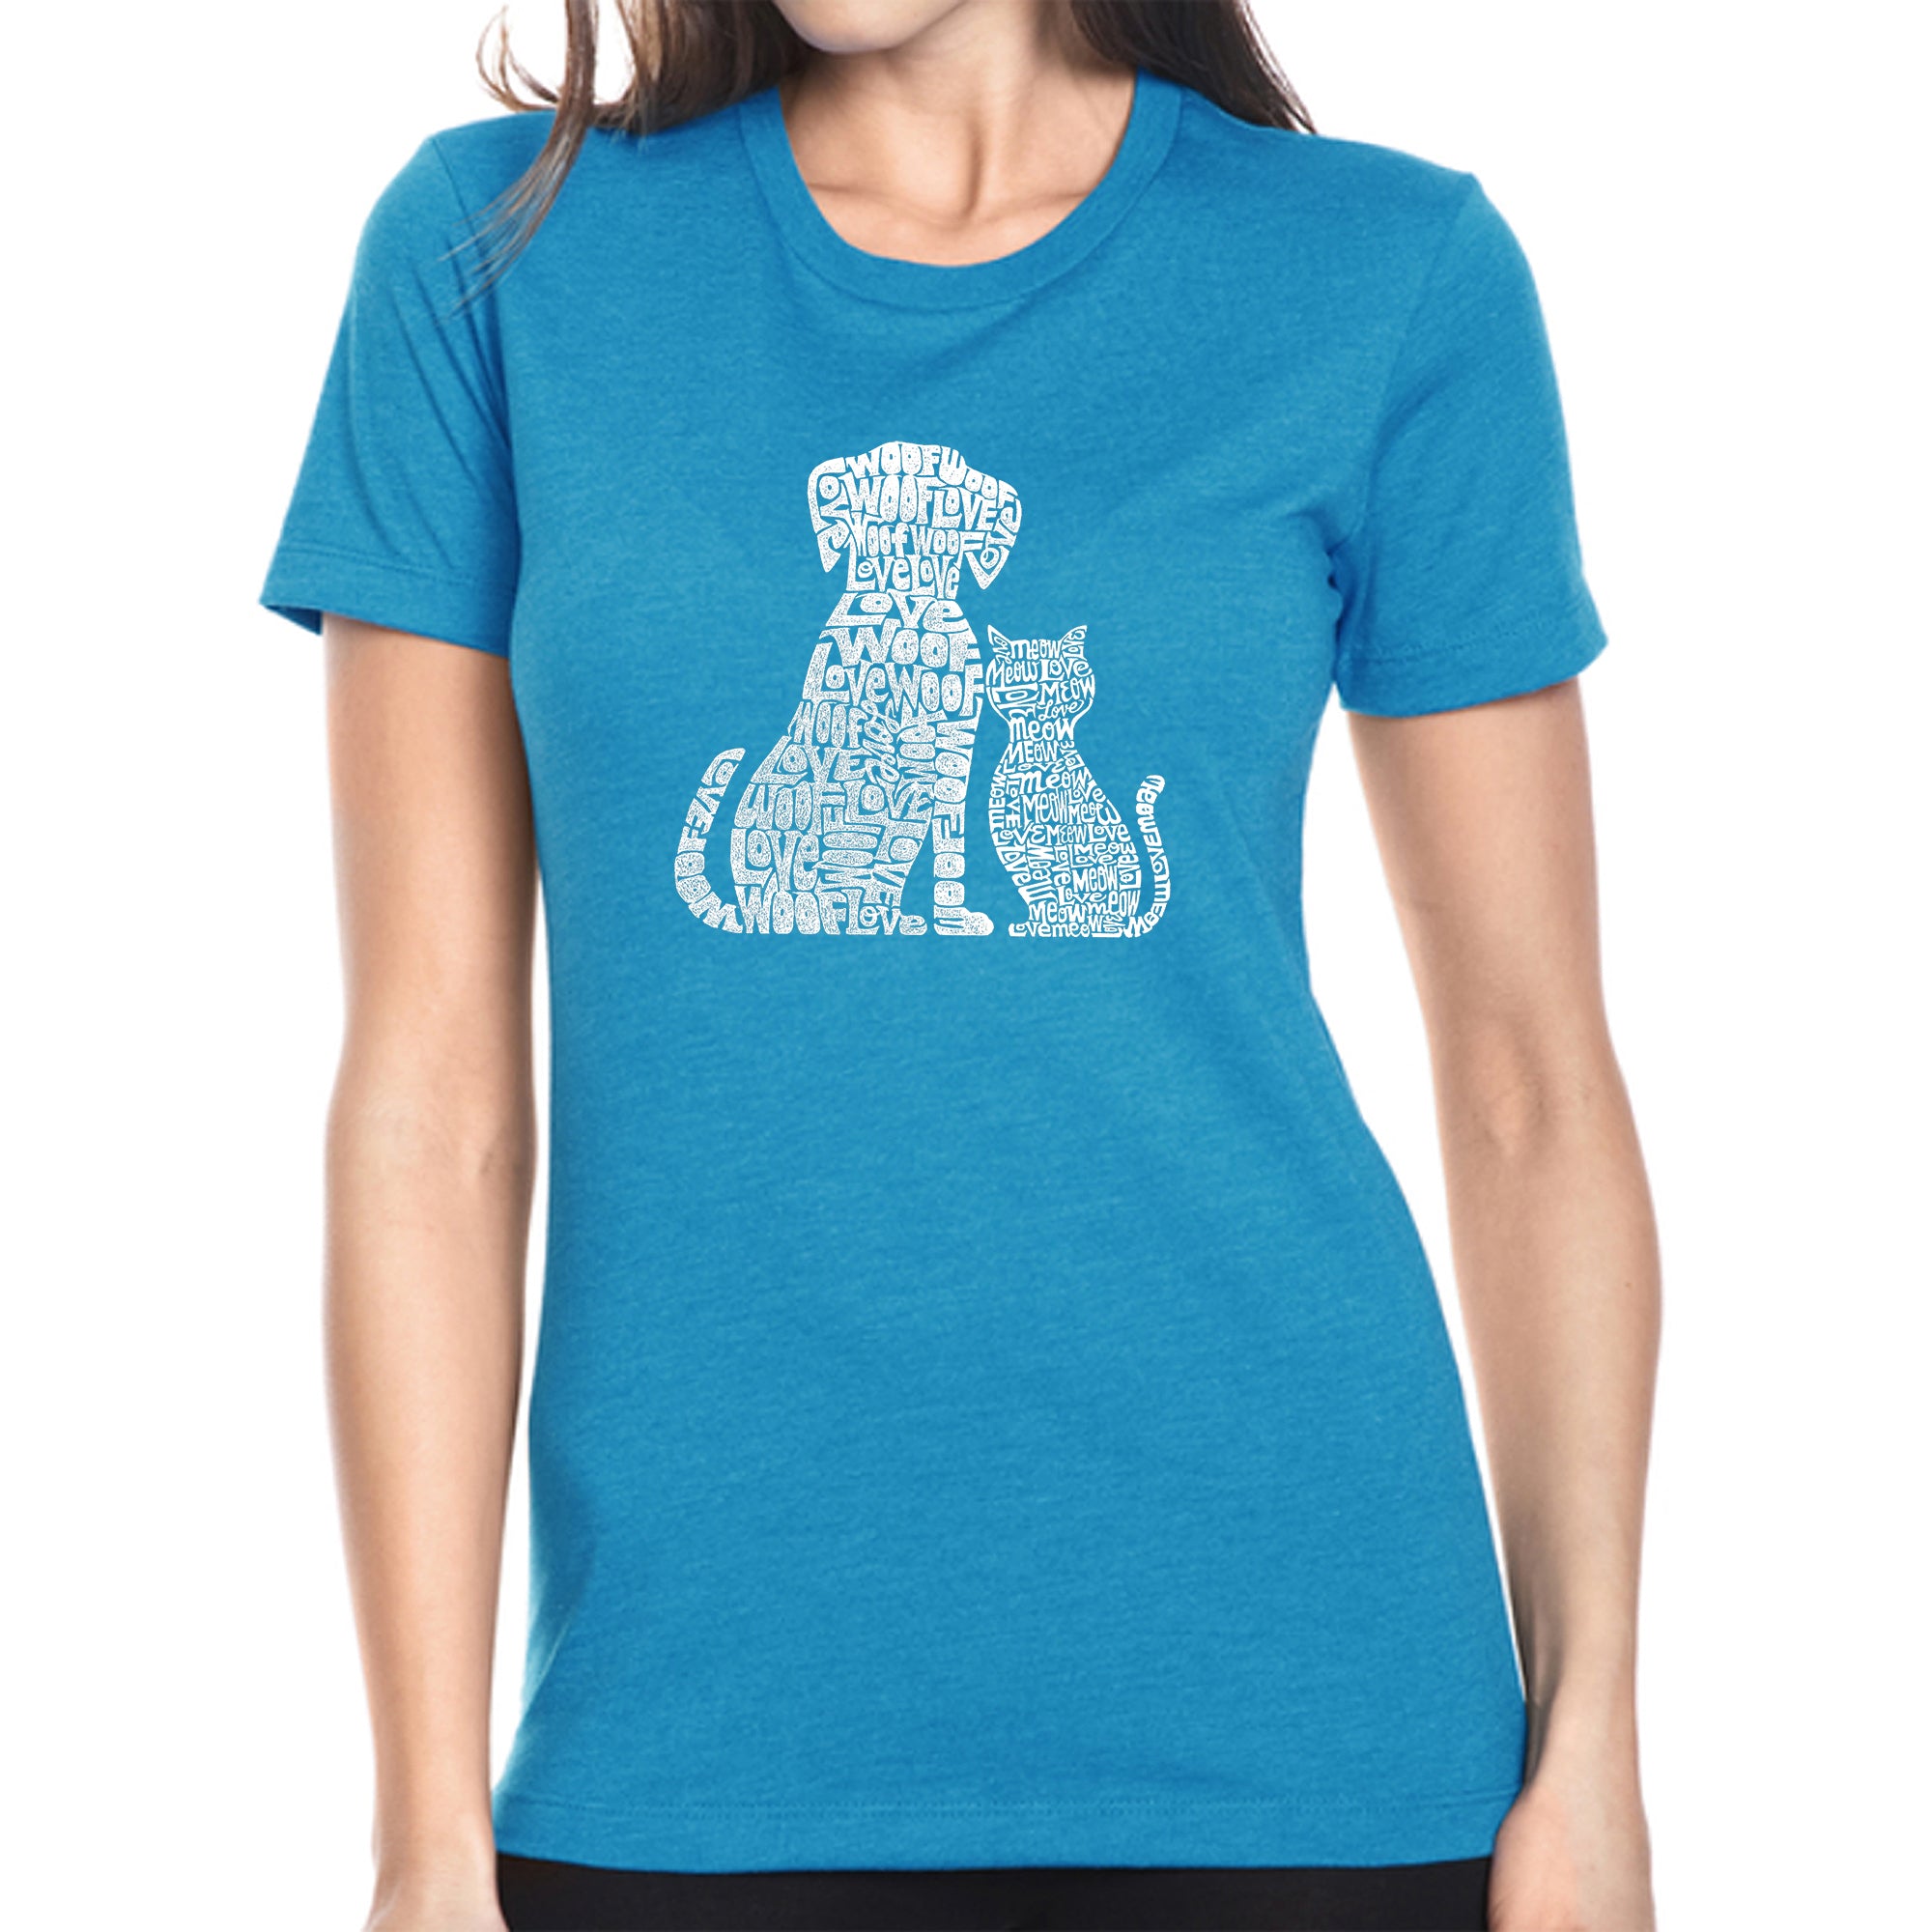 Dogs And Cats - Women's Premium Blend Word Art T-Shirt - Turquoise - Large